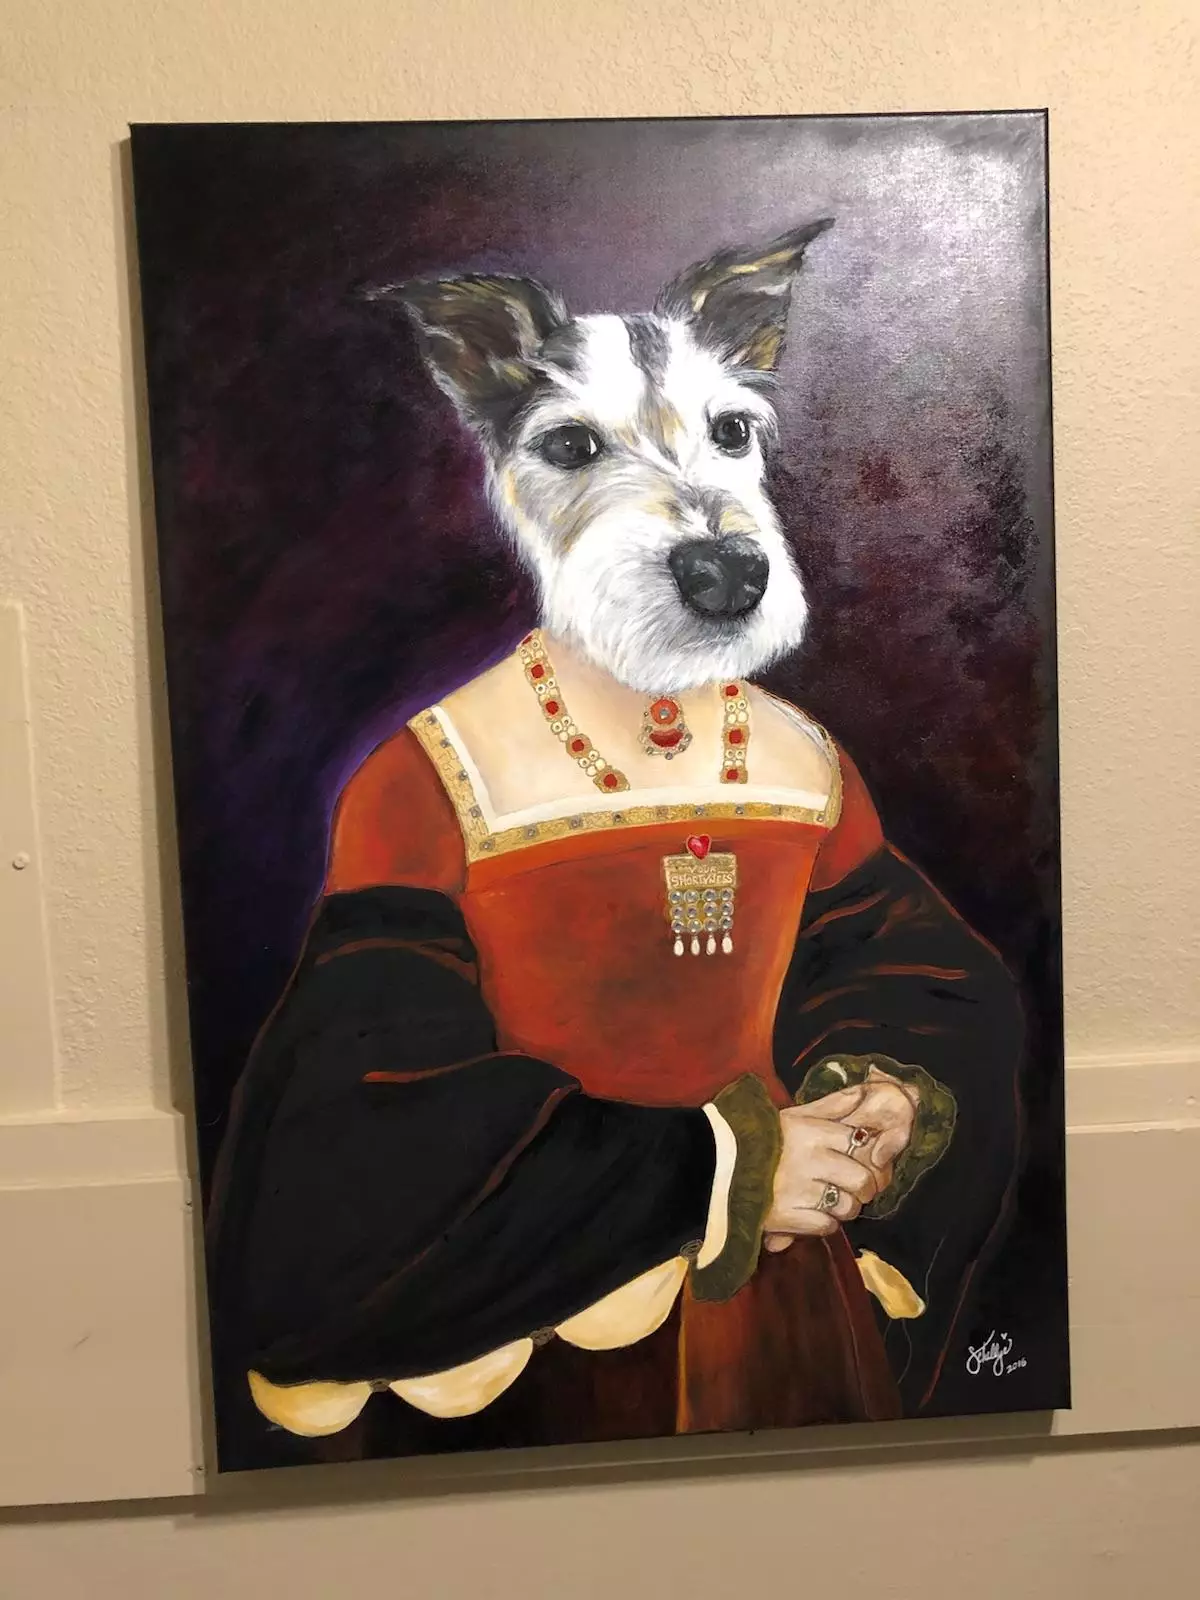 What? Doesn't every owner get a portrait made of their dog?